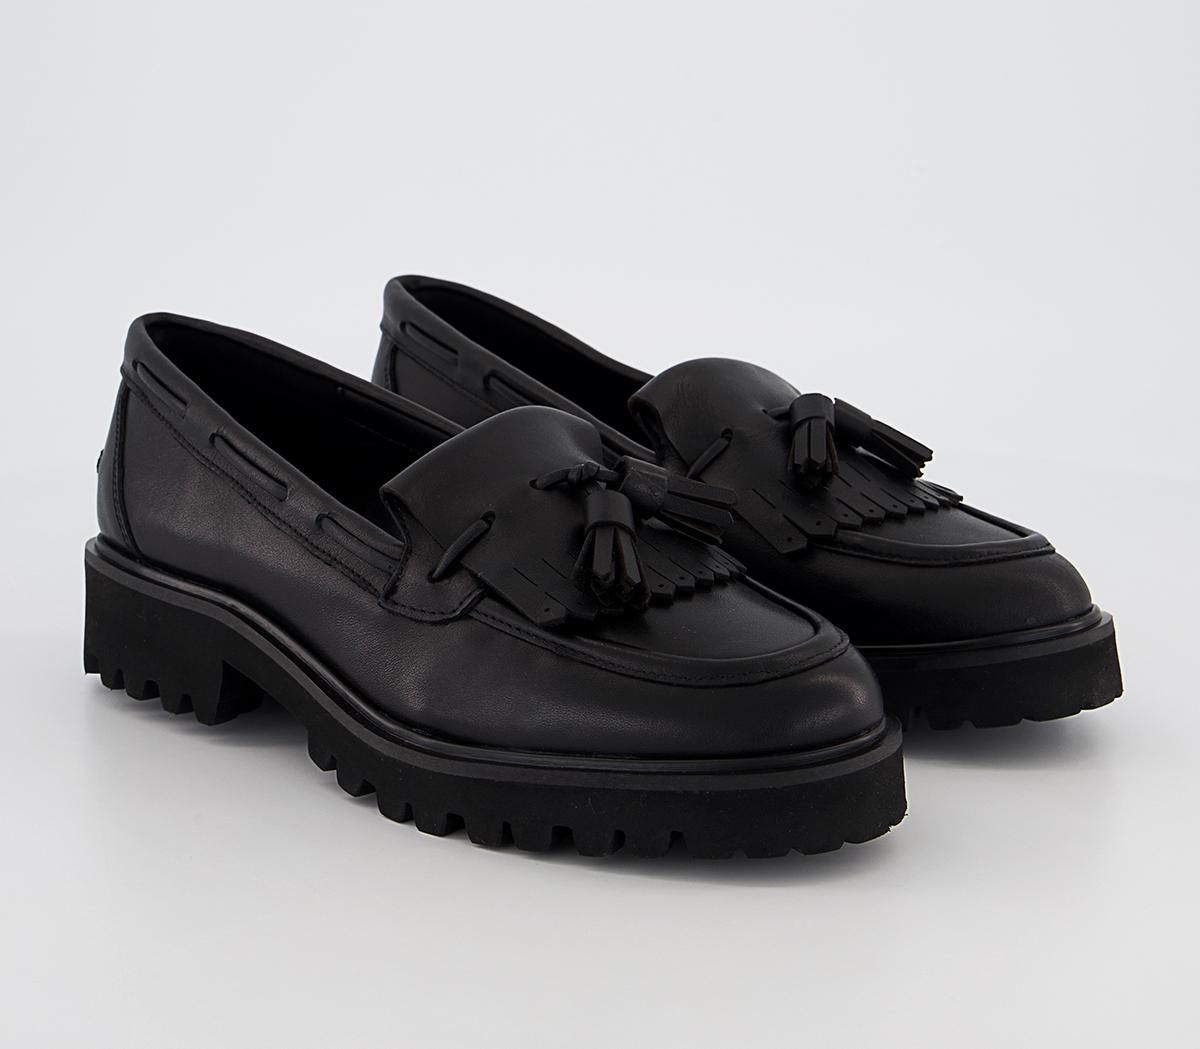 OFFICE Freya Fringe Loafers Black Leather - Flat Shoes for Women